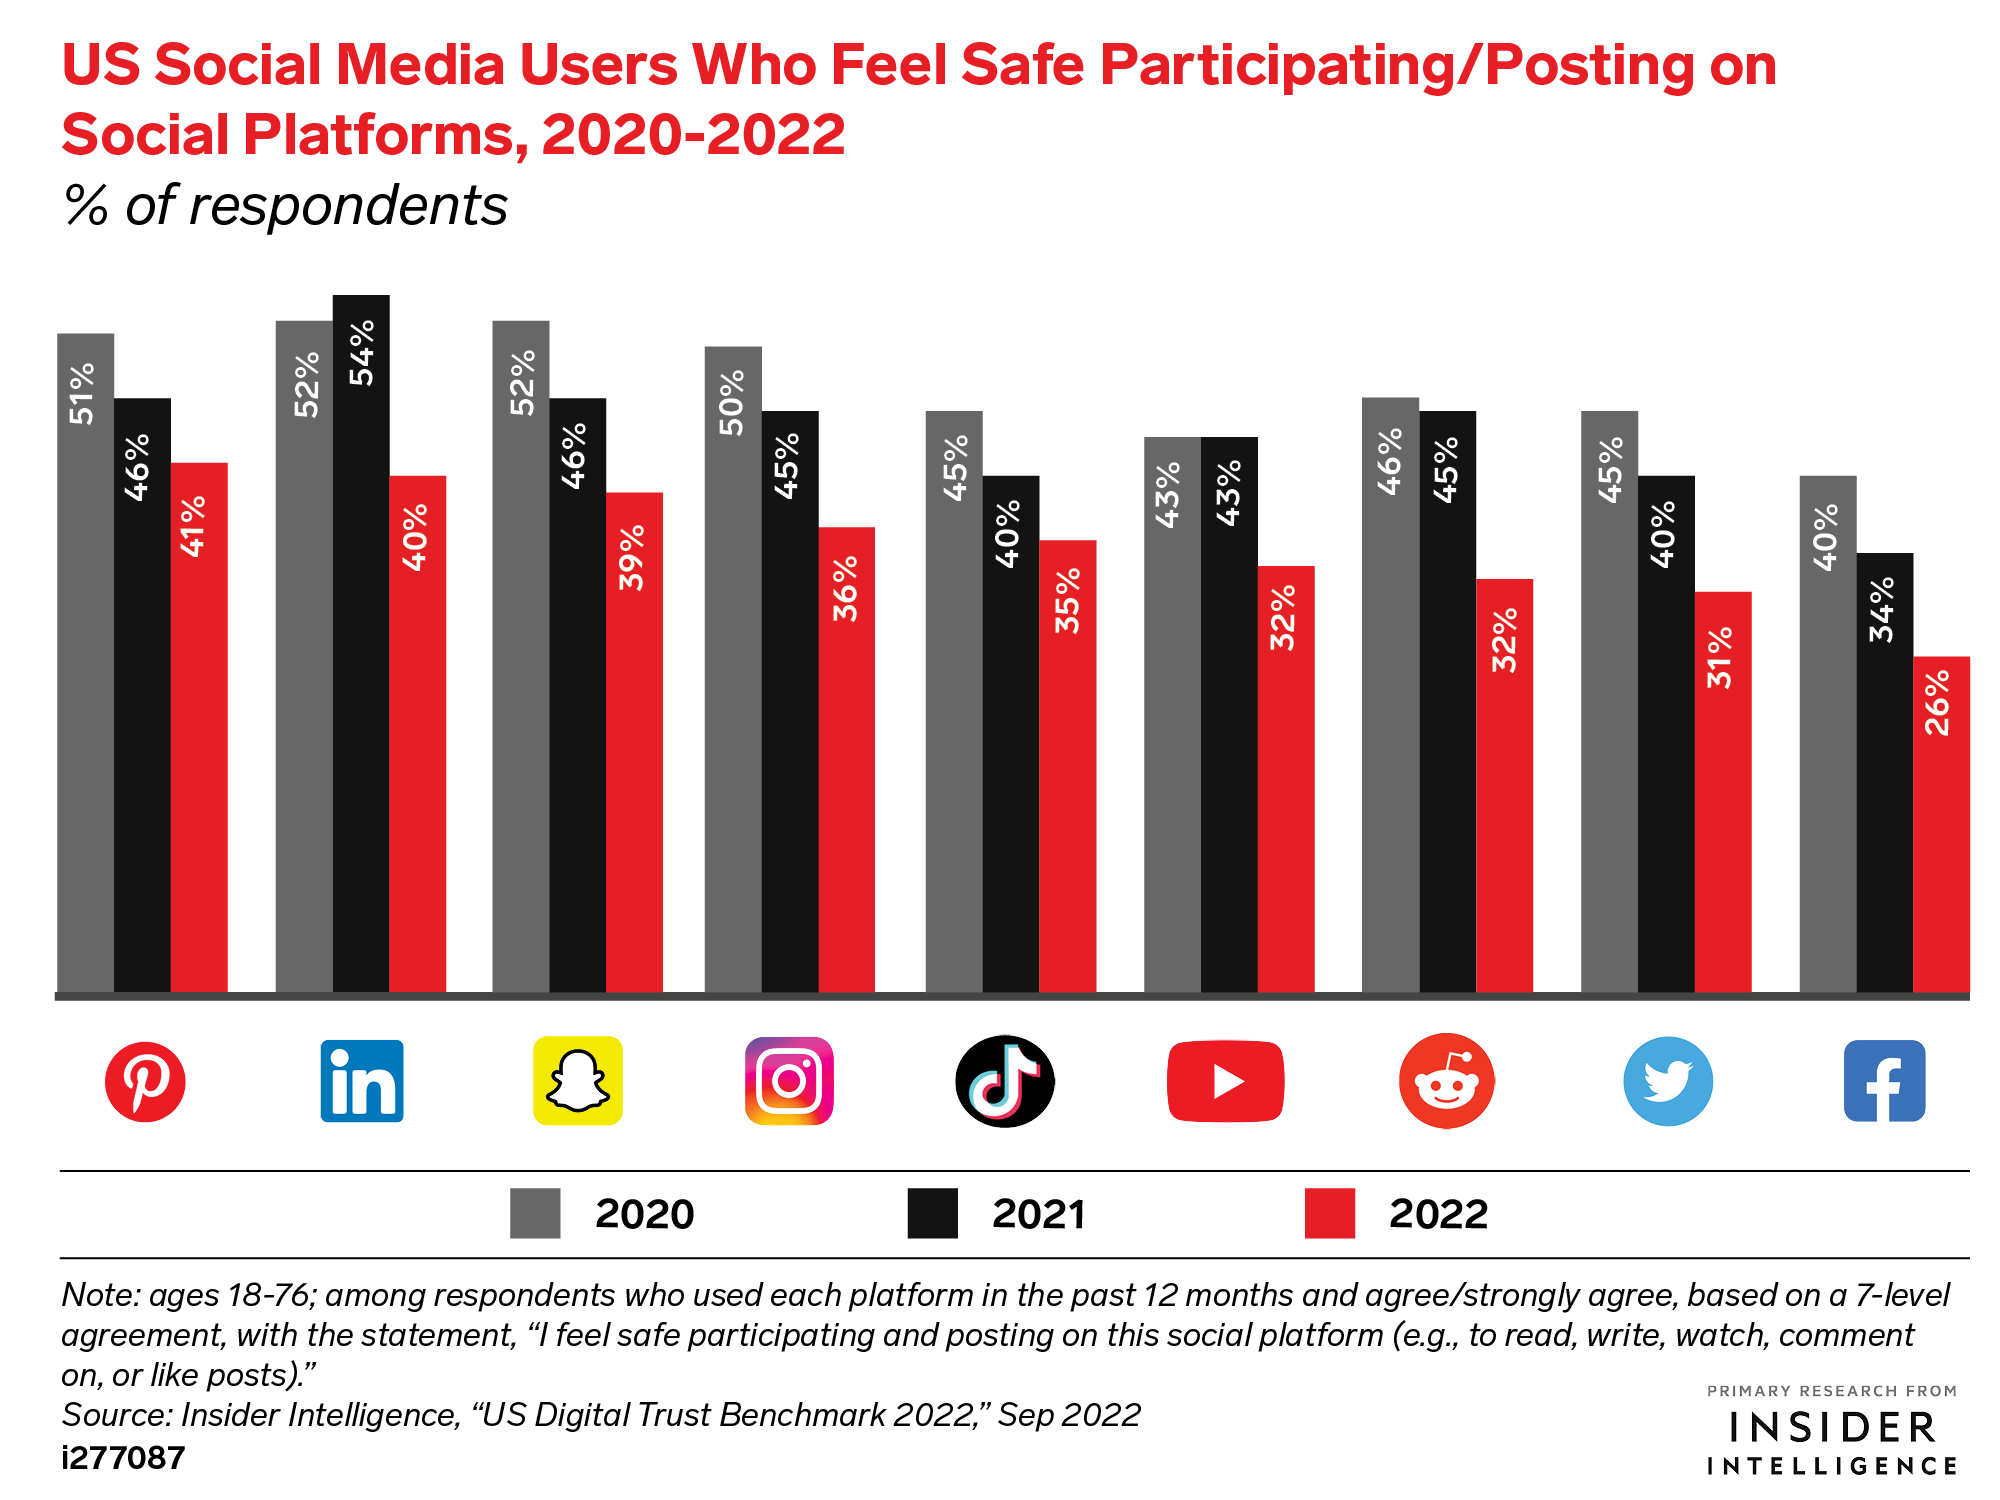 US Social Media Users Who Feel Safe Participating/Posting on Social Platforms, 2020-2022 (% of respondents)